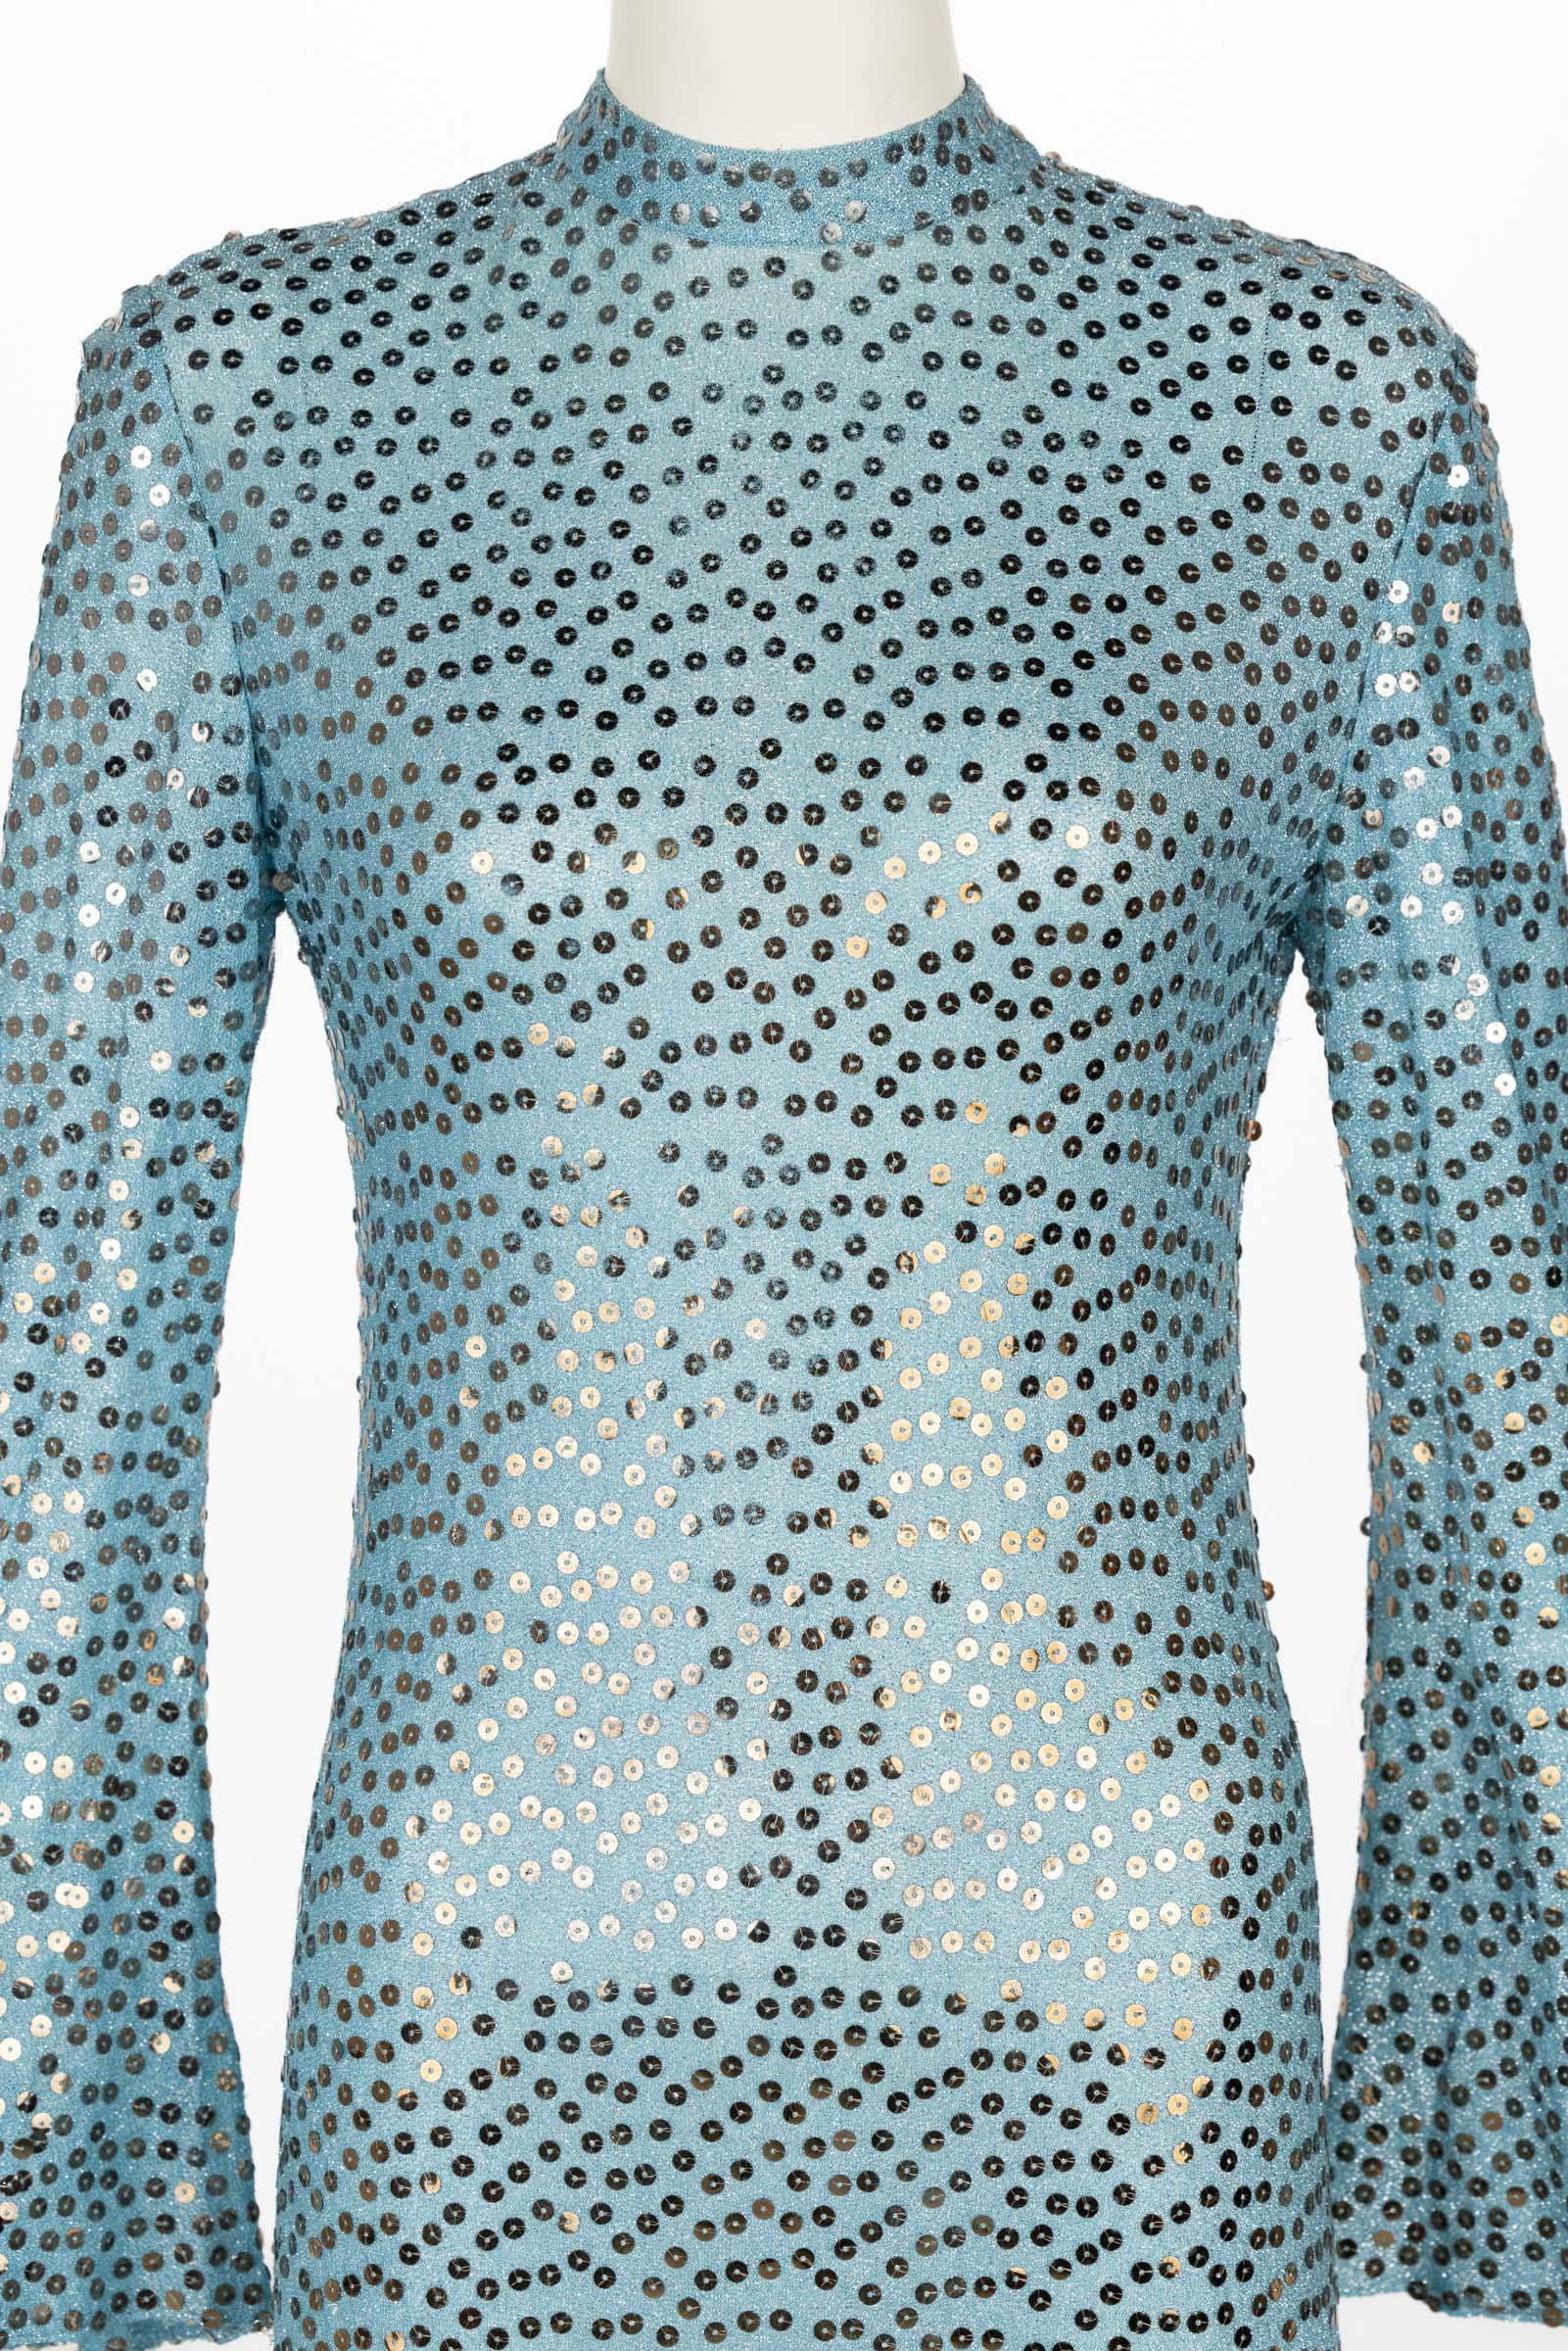 Women's Mollie Parnis Silver Sequin Ice Blue Knit Lame Jersey Dress, 1970s For Sale